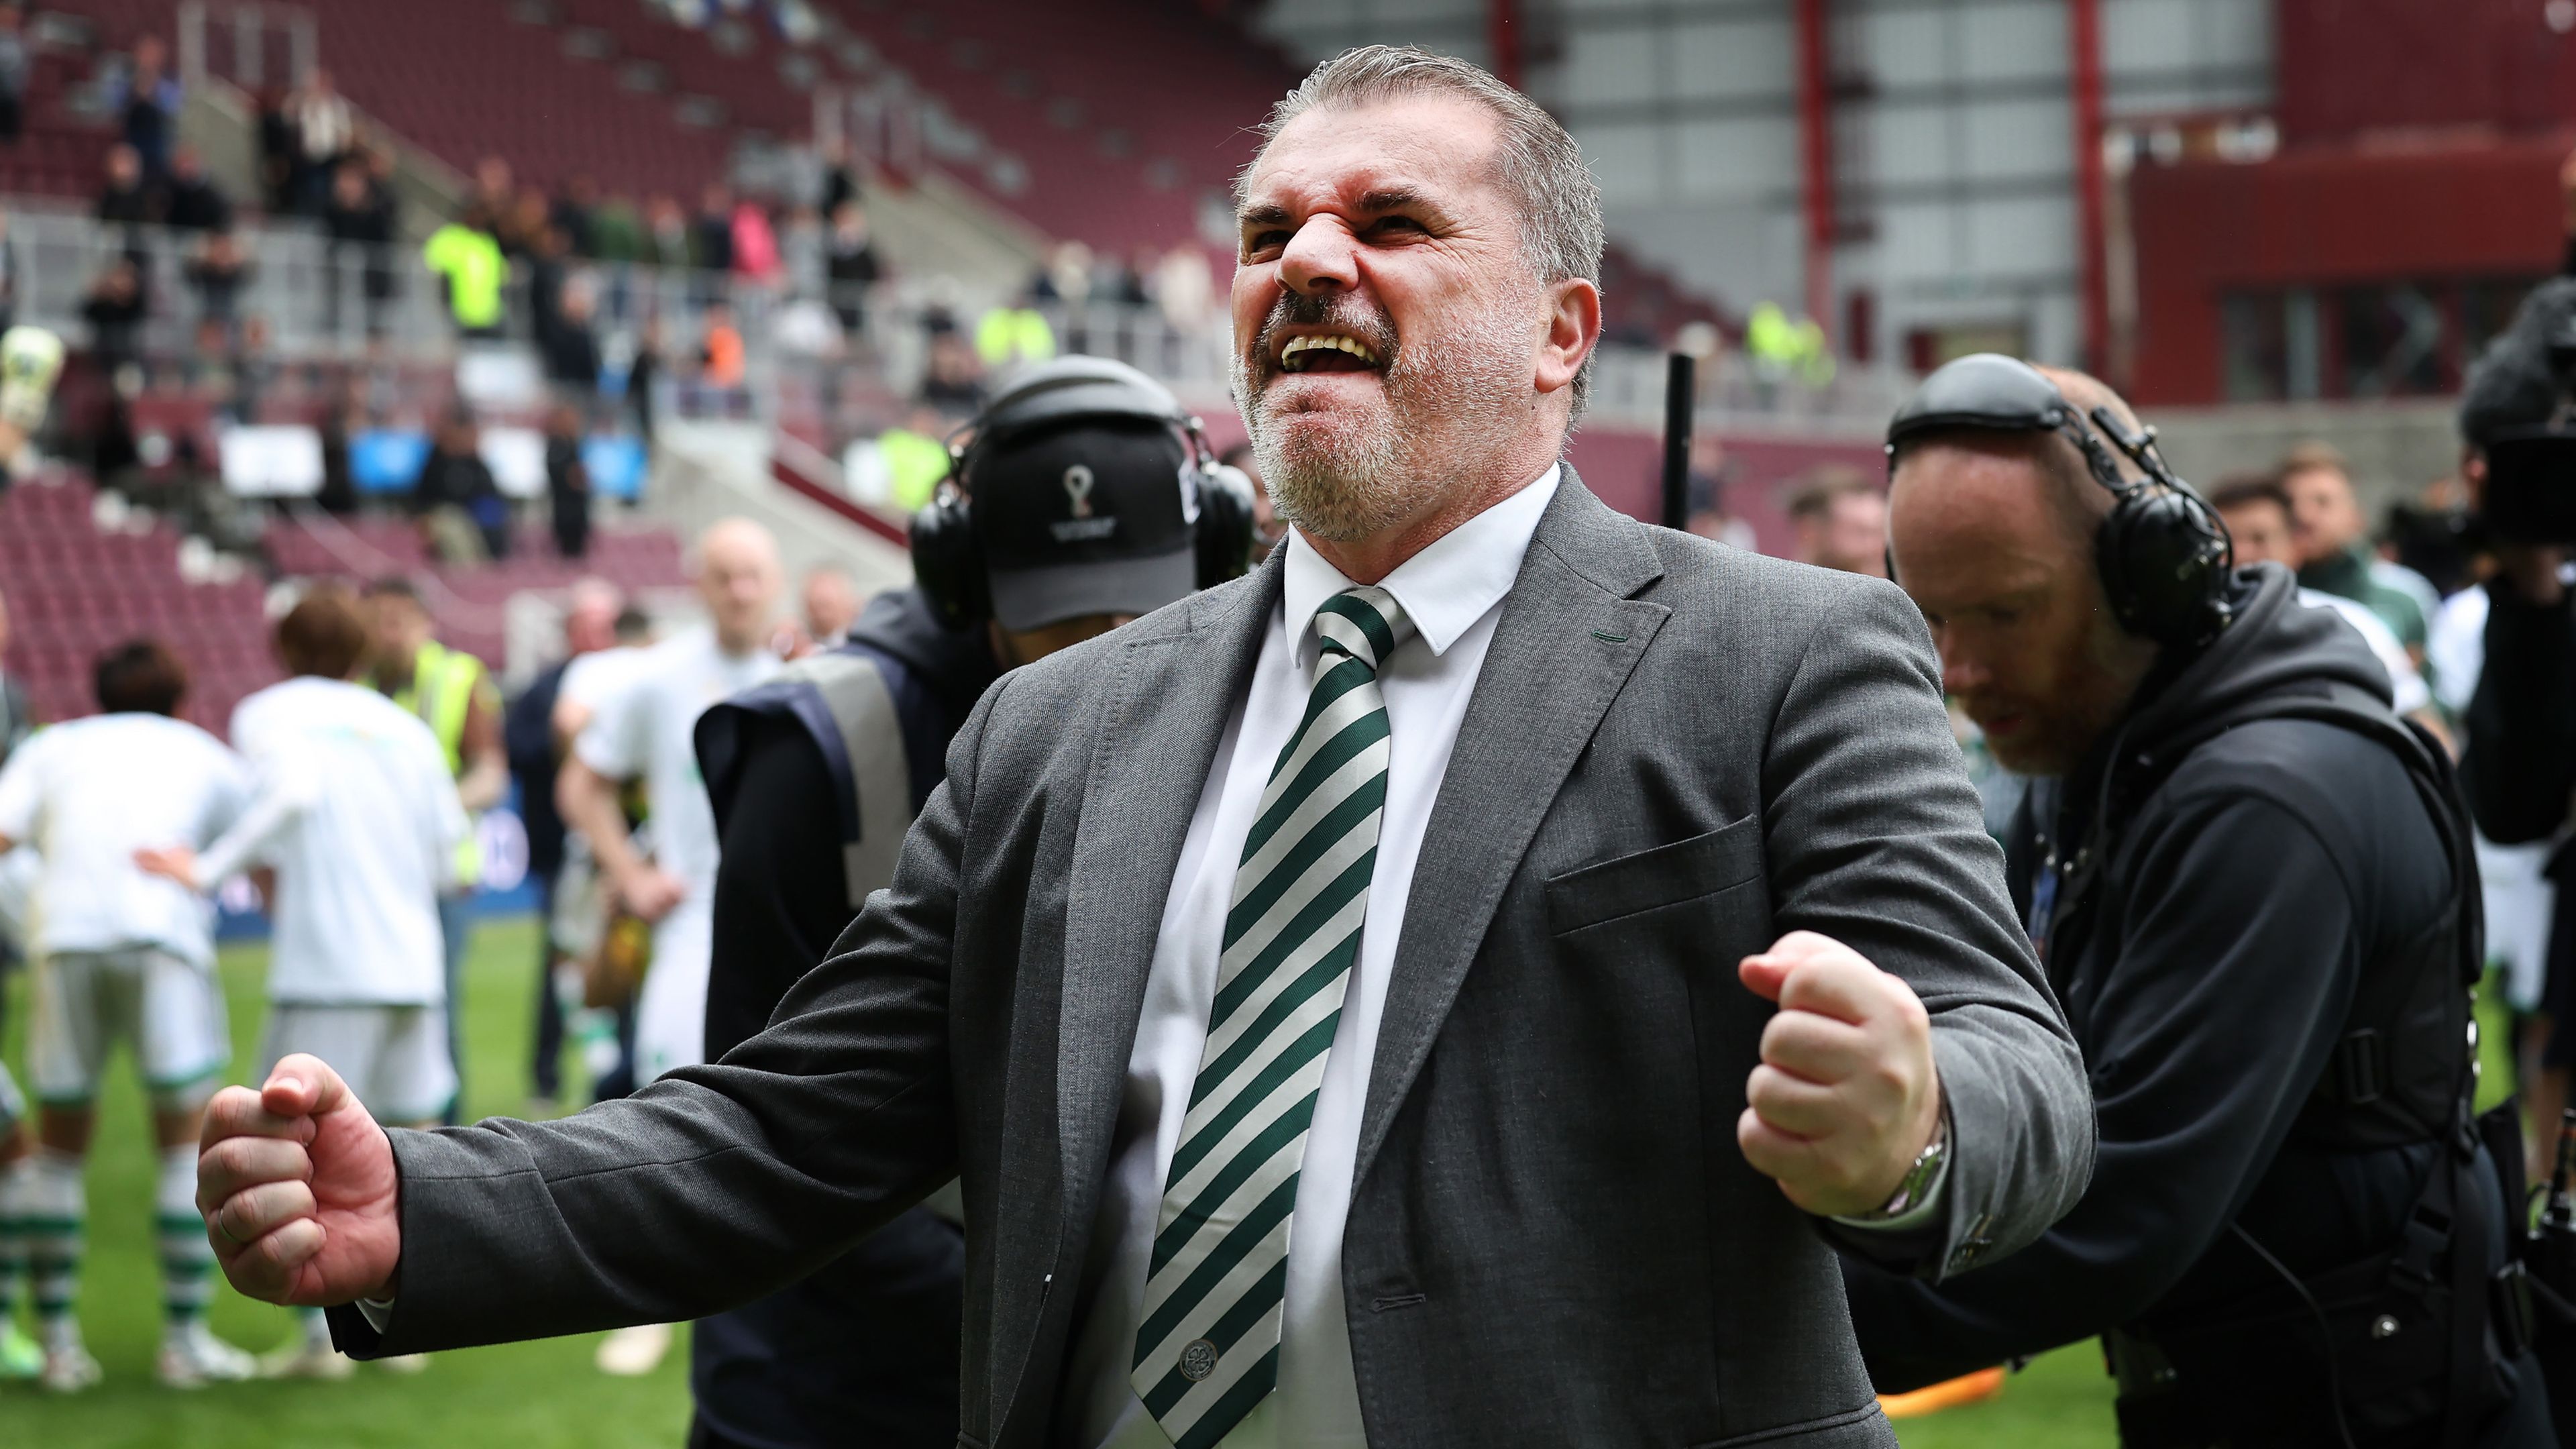 Angelos Postecoglou, Manager of Celtic, celebrates after winning the Cinch Scottish Premiership following the match between Heart of Midlothian and Celtic FC at Tynecastle Park on May 07, 2023 in Edinburgh, Scotland. (Photo by Ian MacNicol/Getty Images)